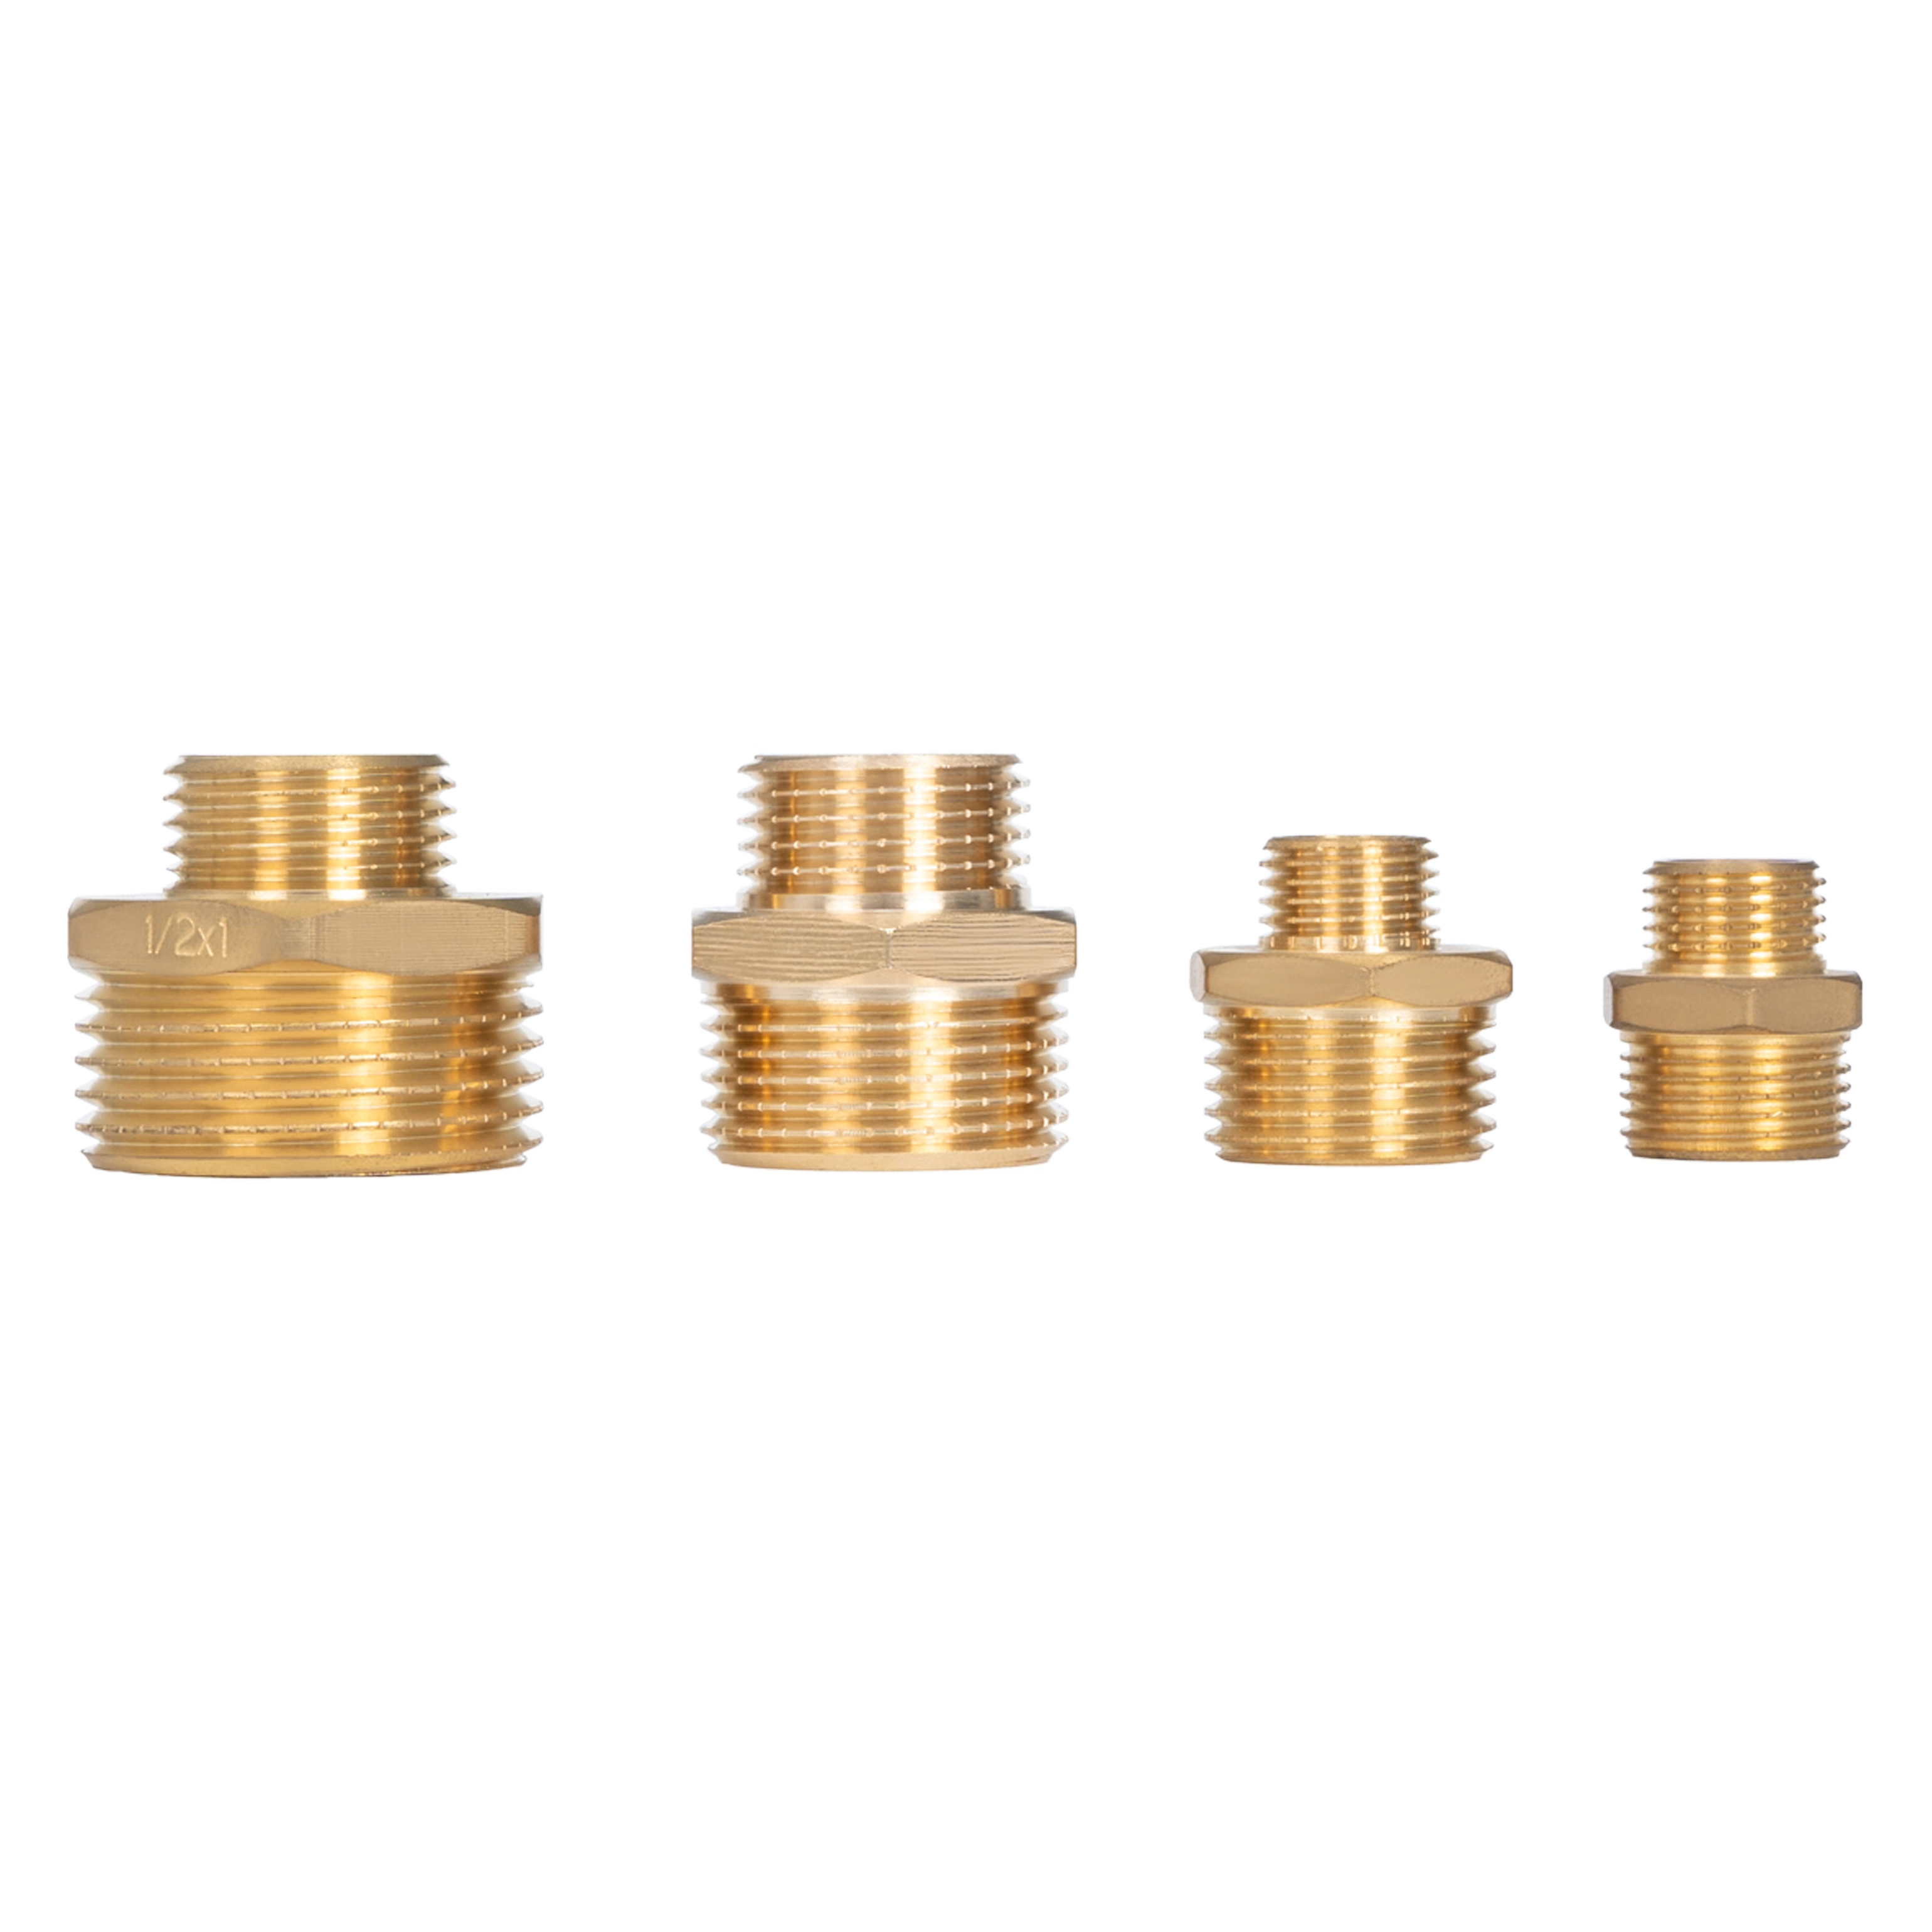 Brass Ferrule Hose Compression Pipe Fittings, Brass Male to Copper Connector Reducing Brass Fittings Manufacturer